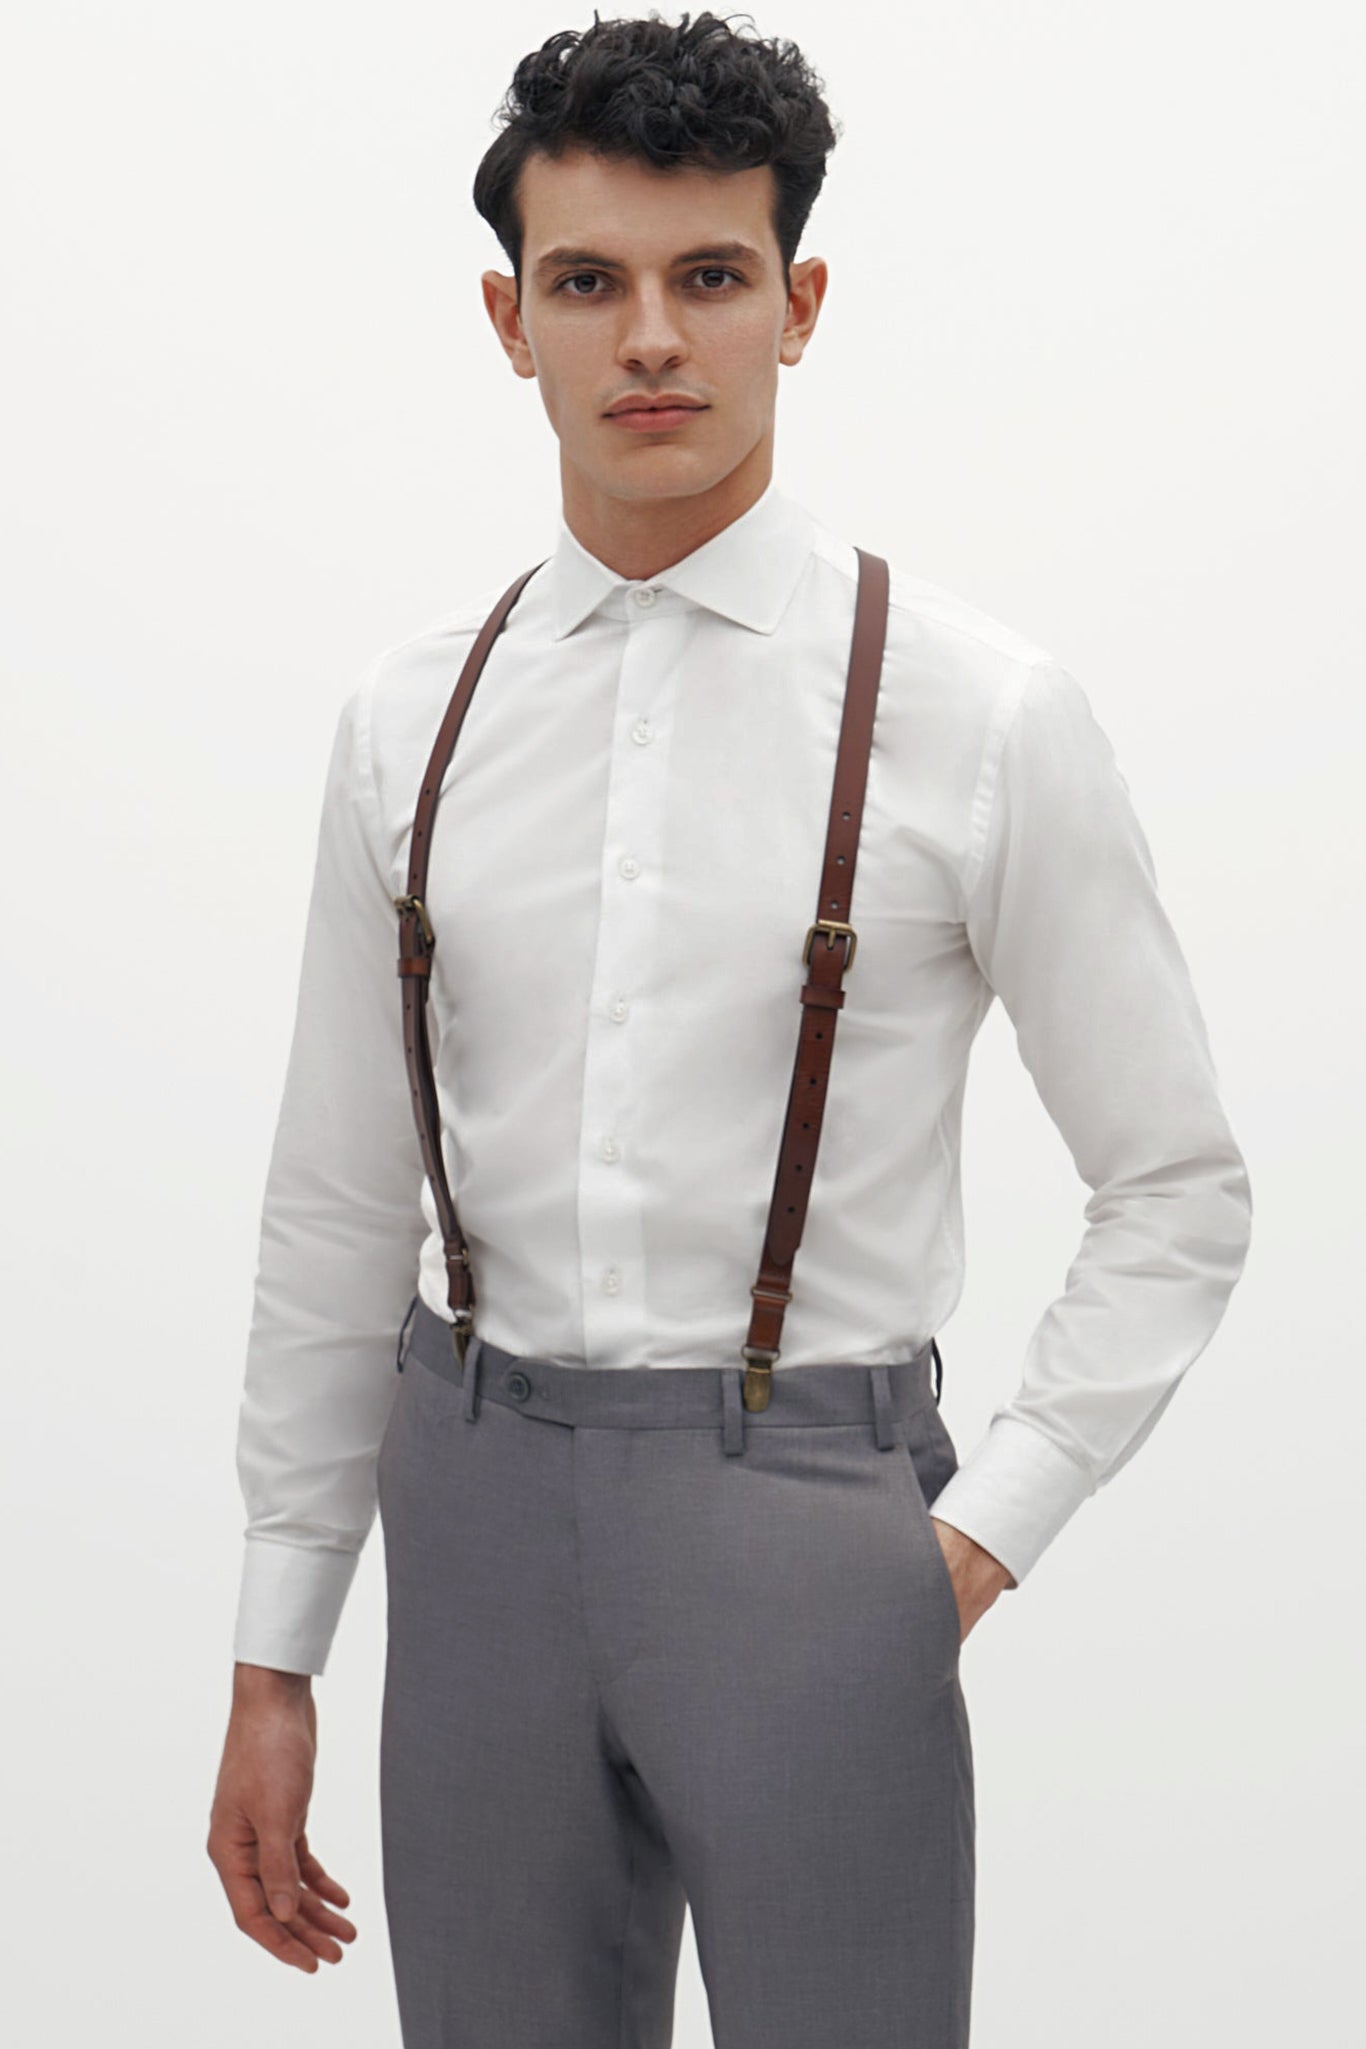 Brown Leather Suspenders by SuitShop, front view